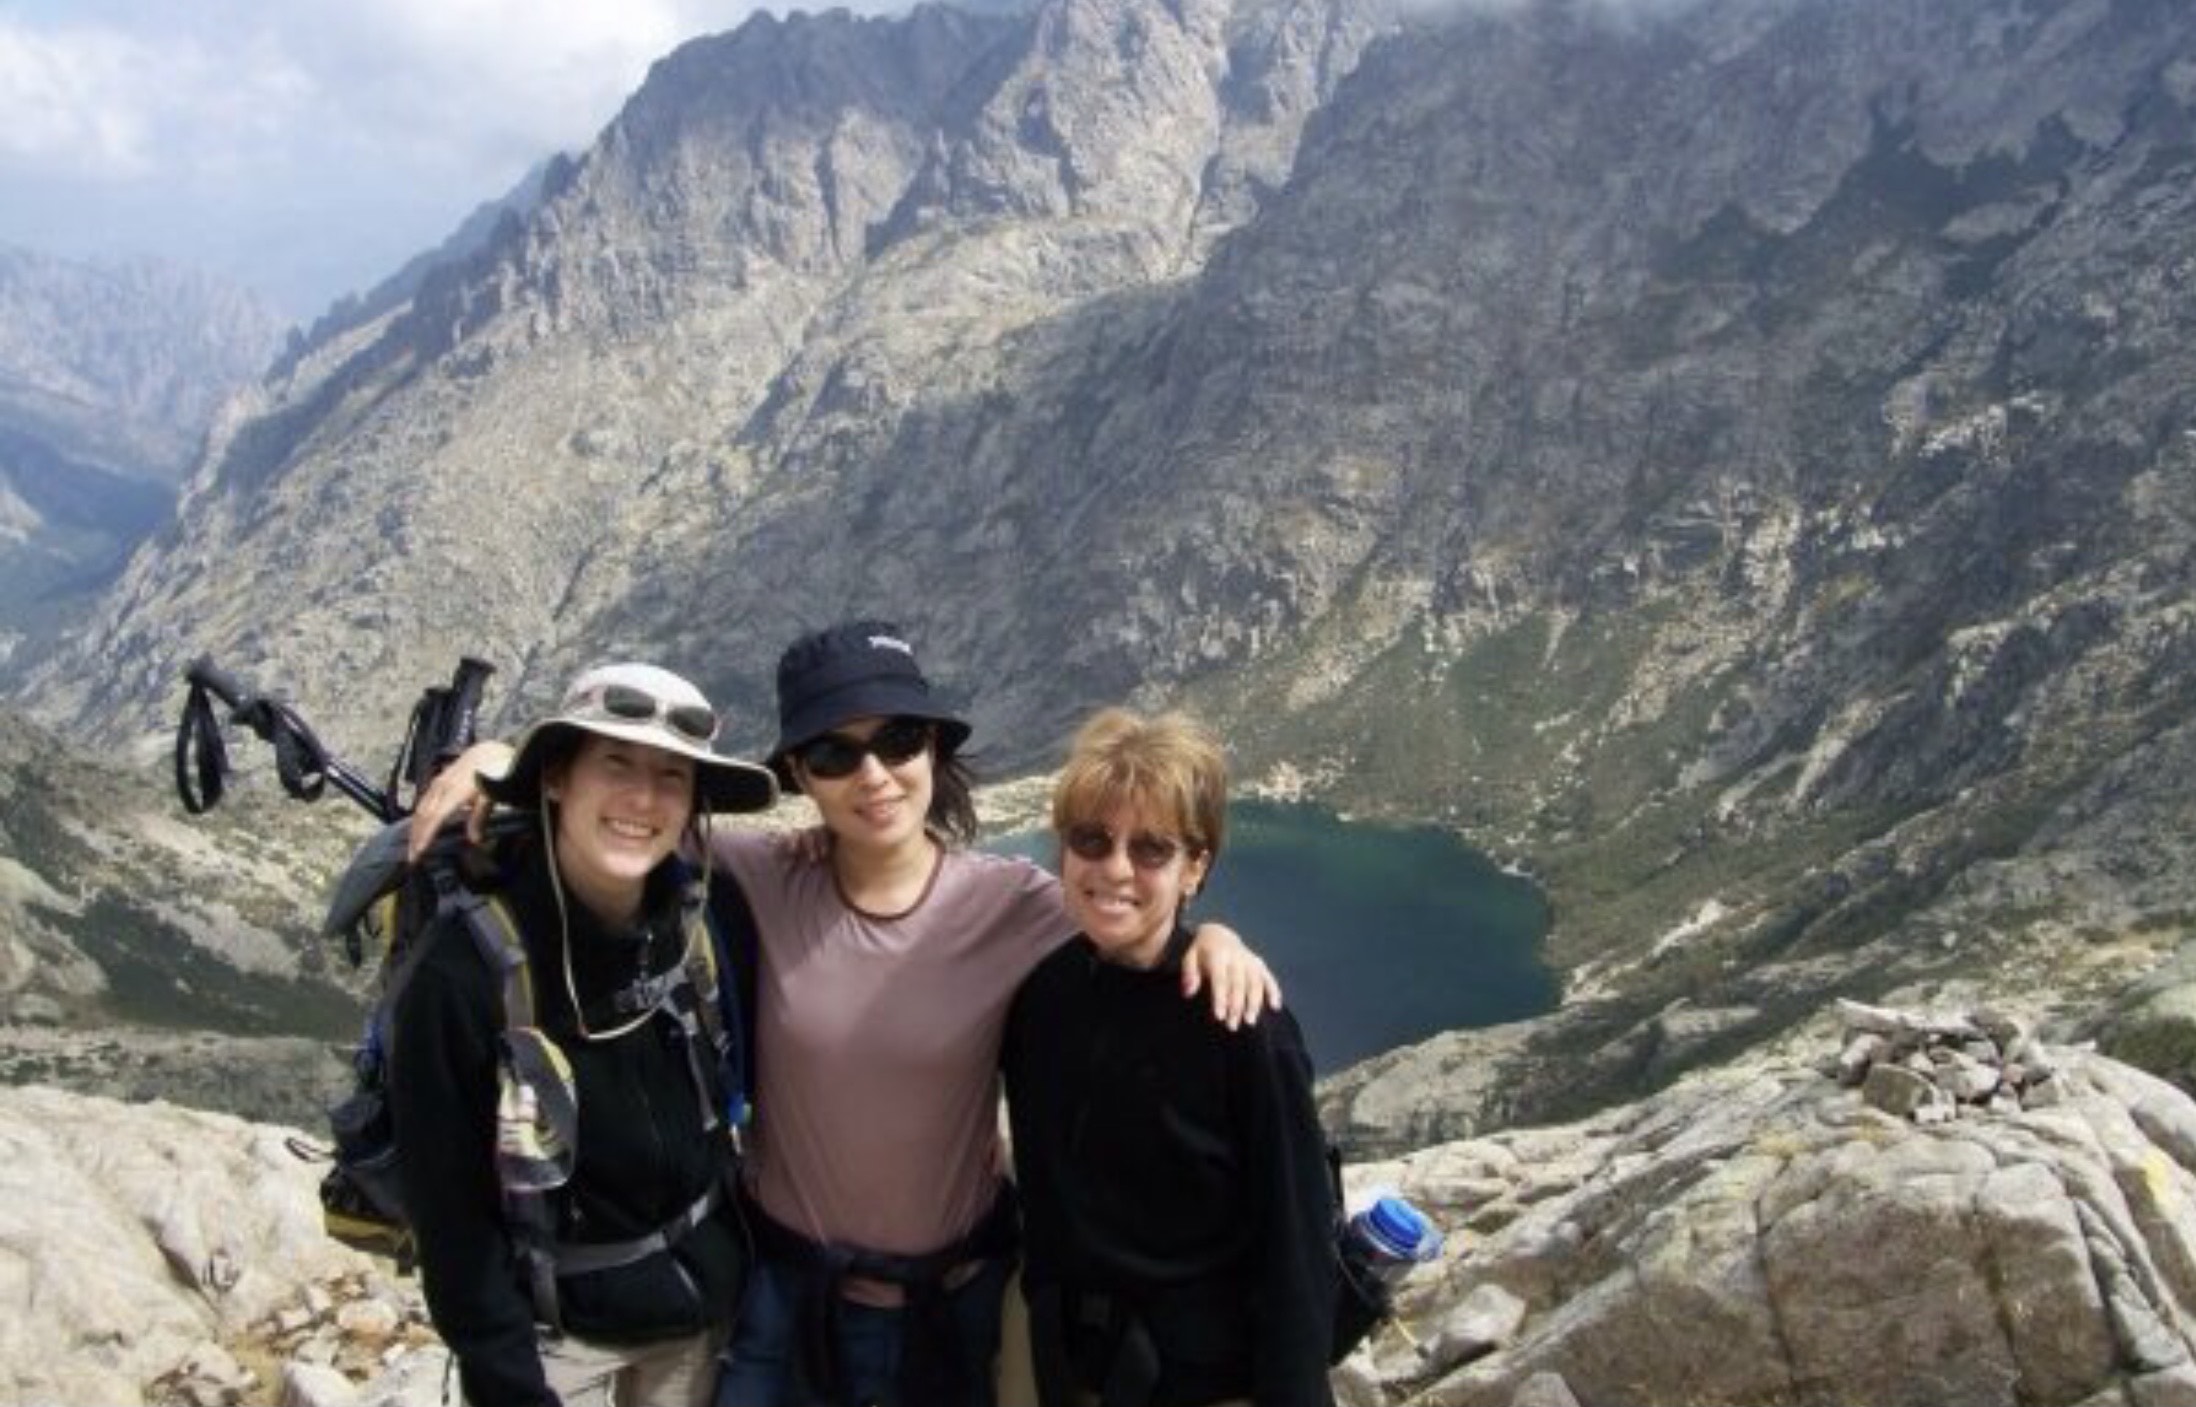 Jeanine Barone and two other women stand in front of lake on mountainside